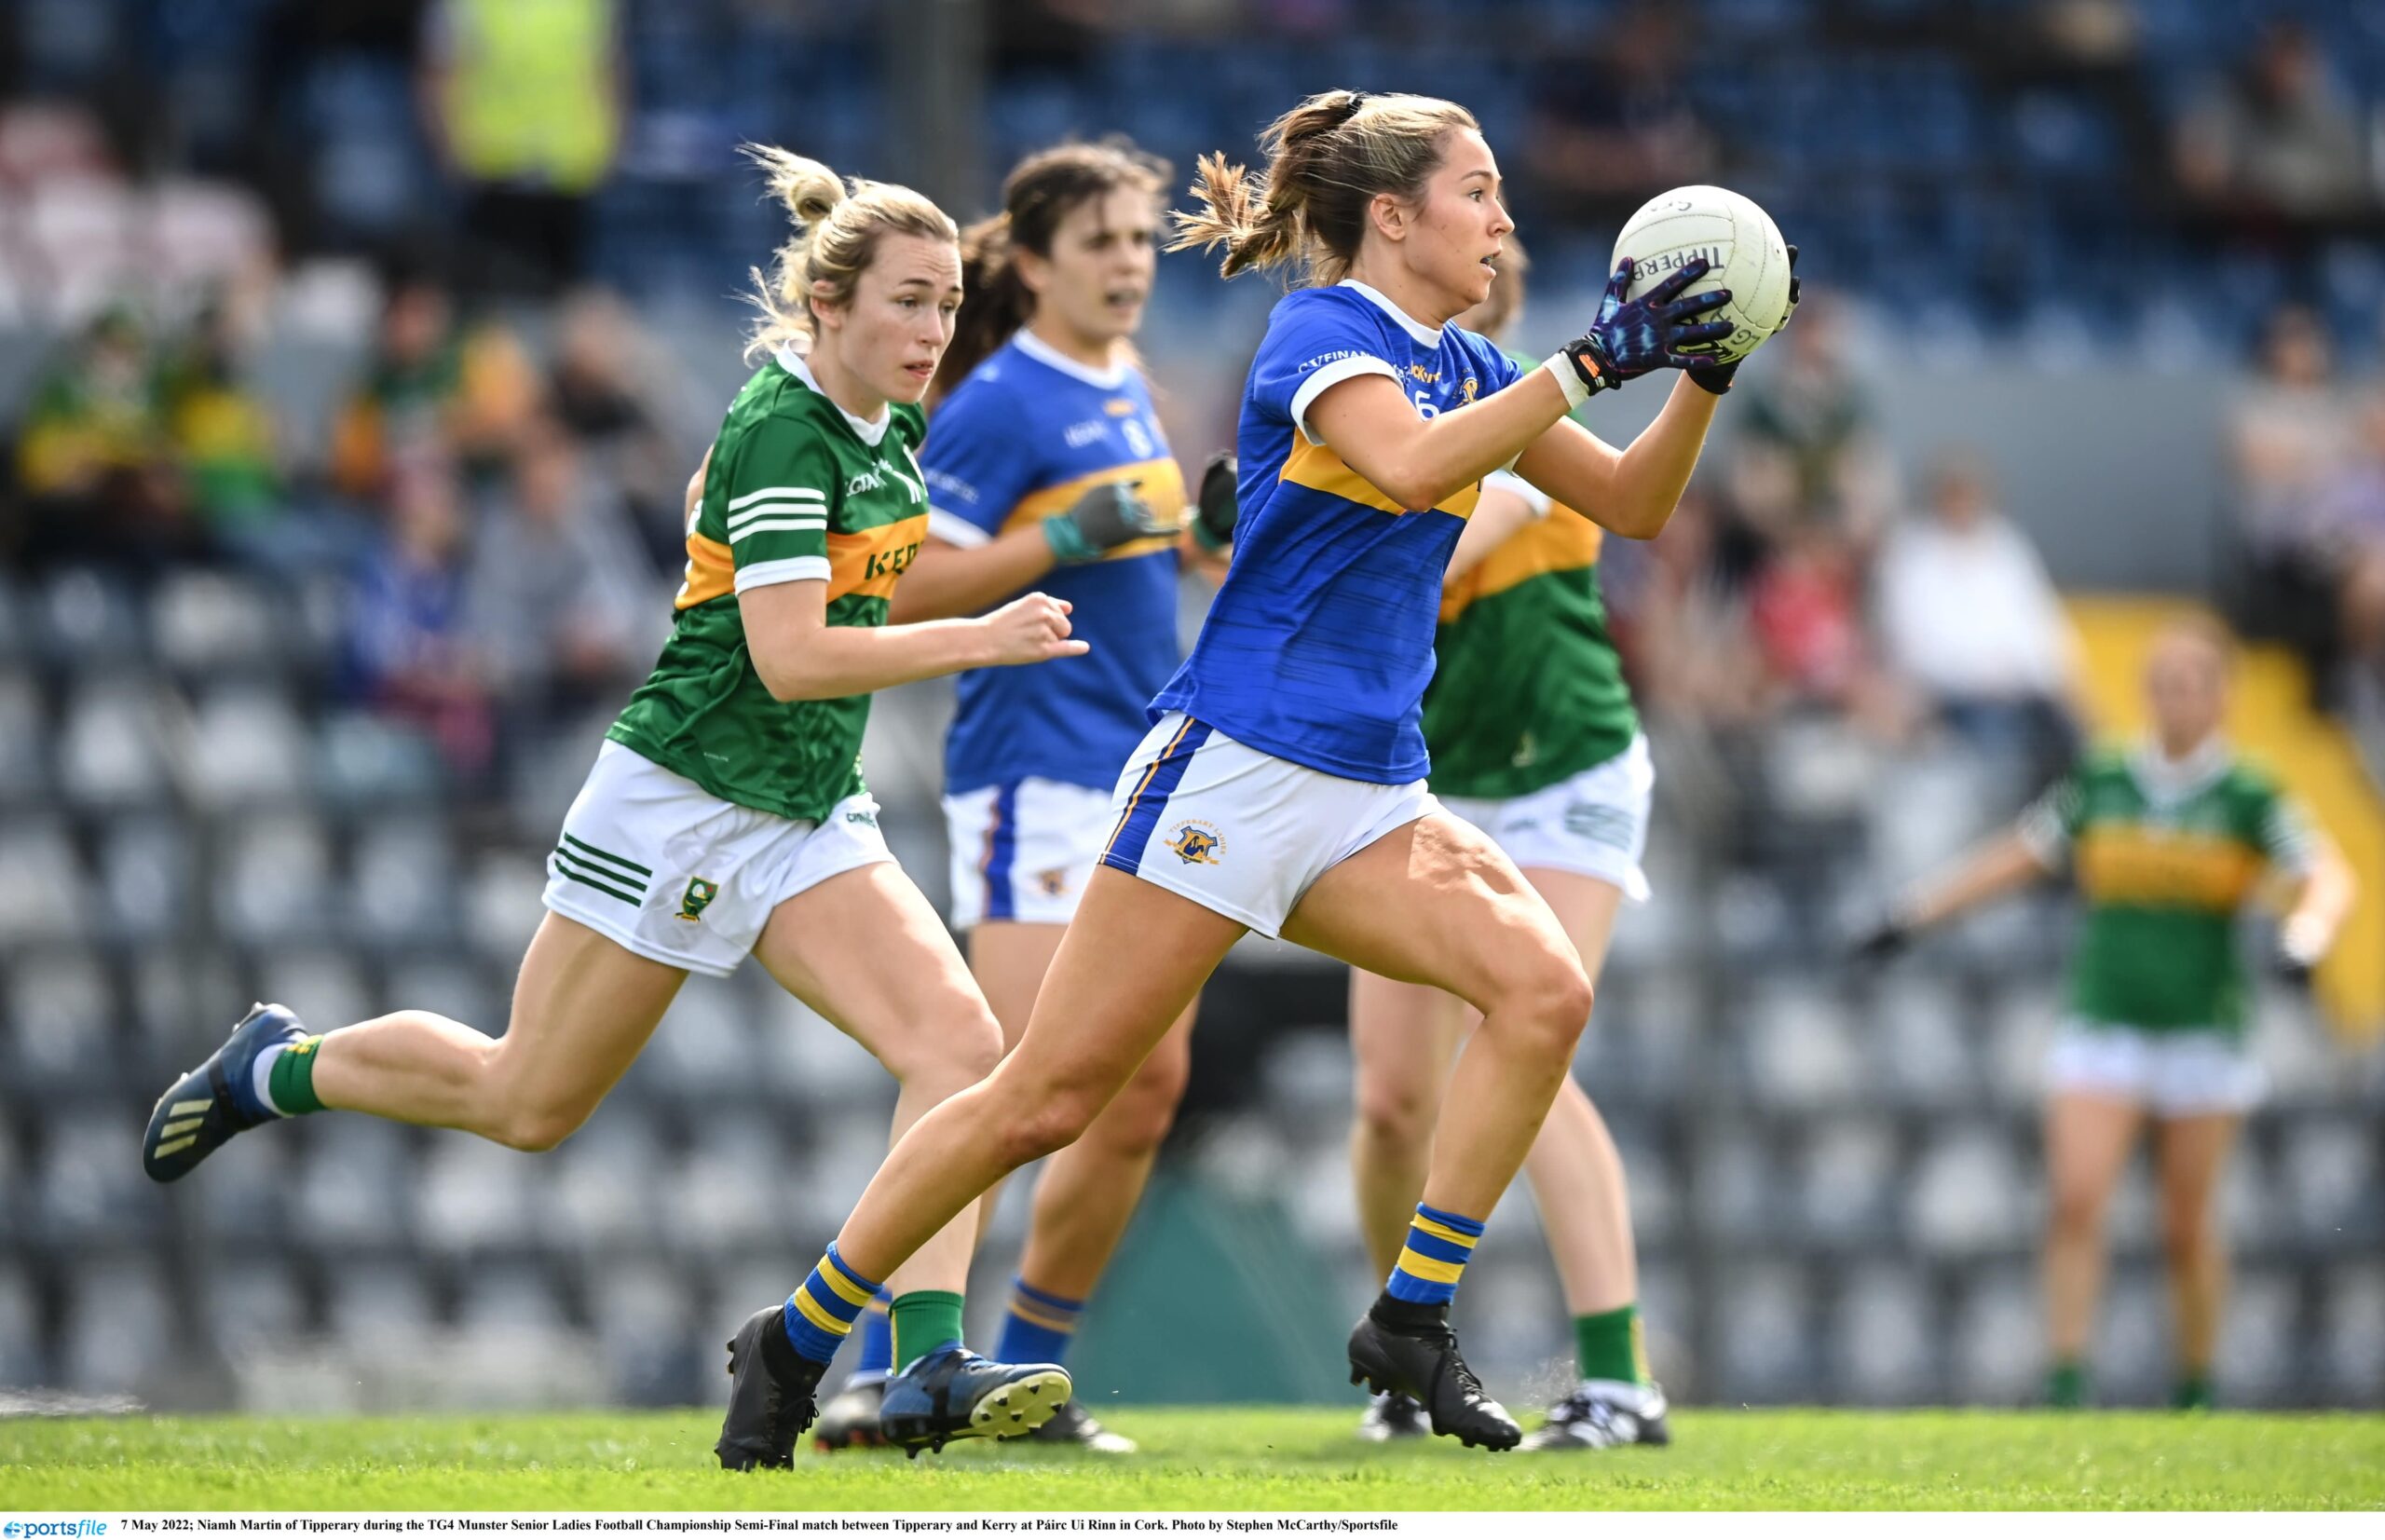 ‘Family ties’ – The Big Interview with Tipperary’s Niamh Martin